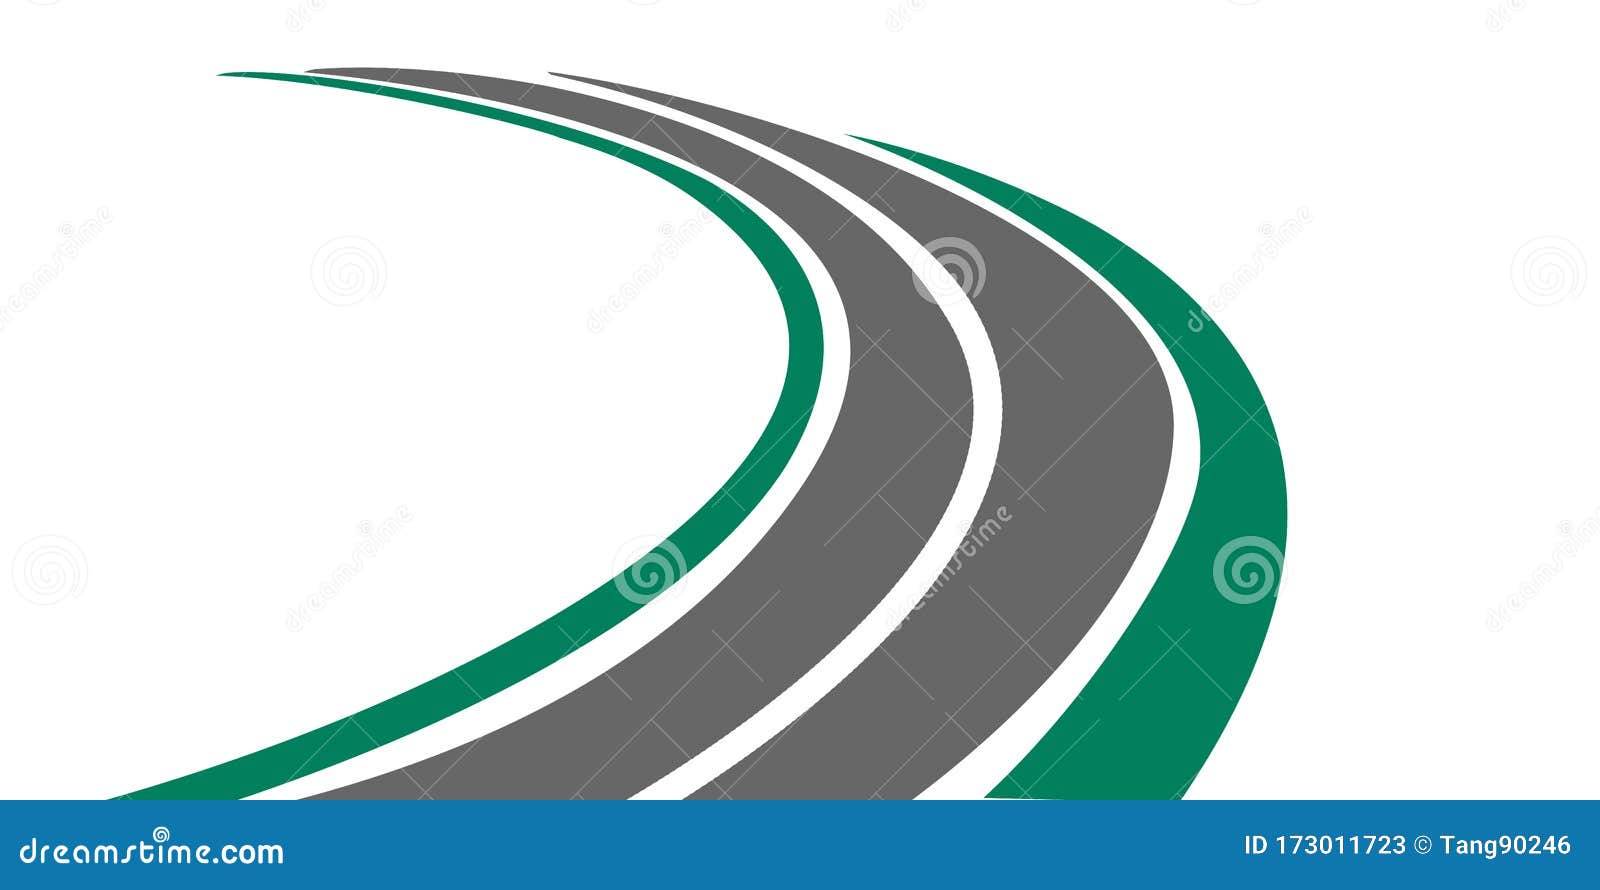 Winding Paved Road Icon With Green Grassy Roadside Stock Illustration